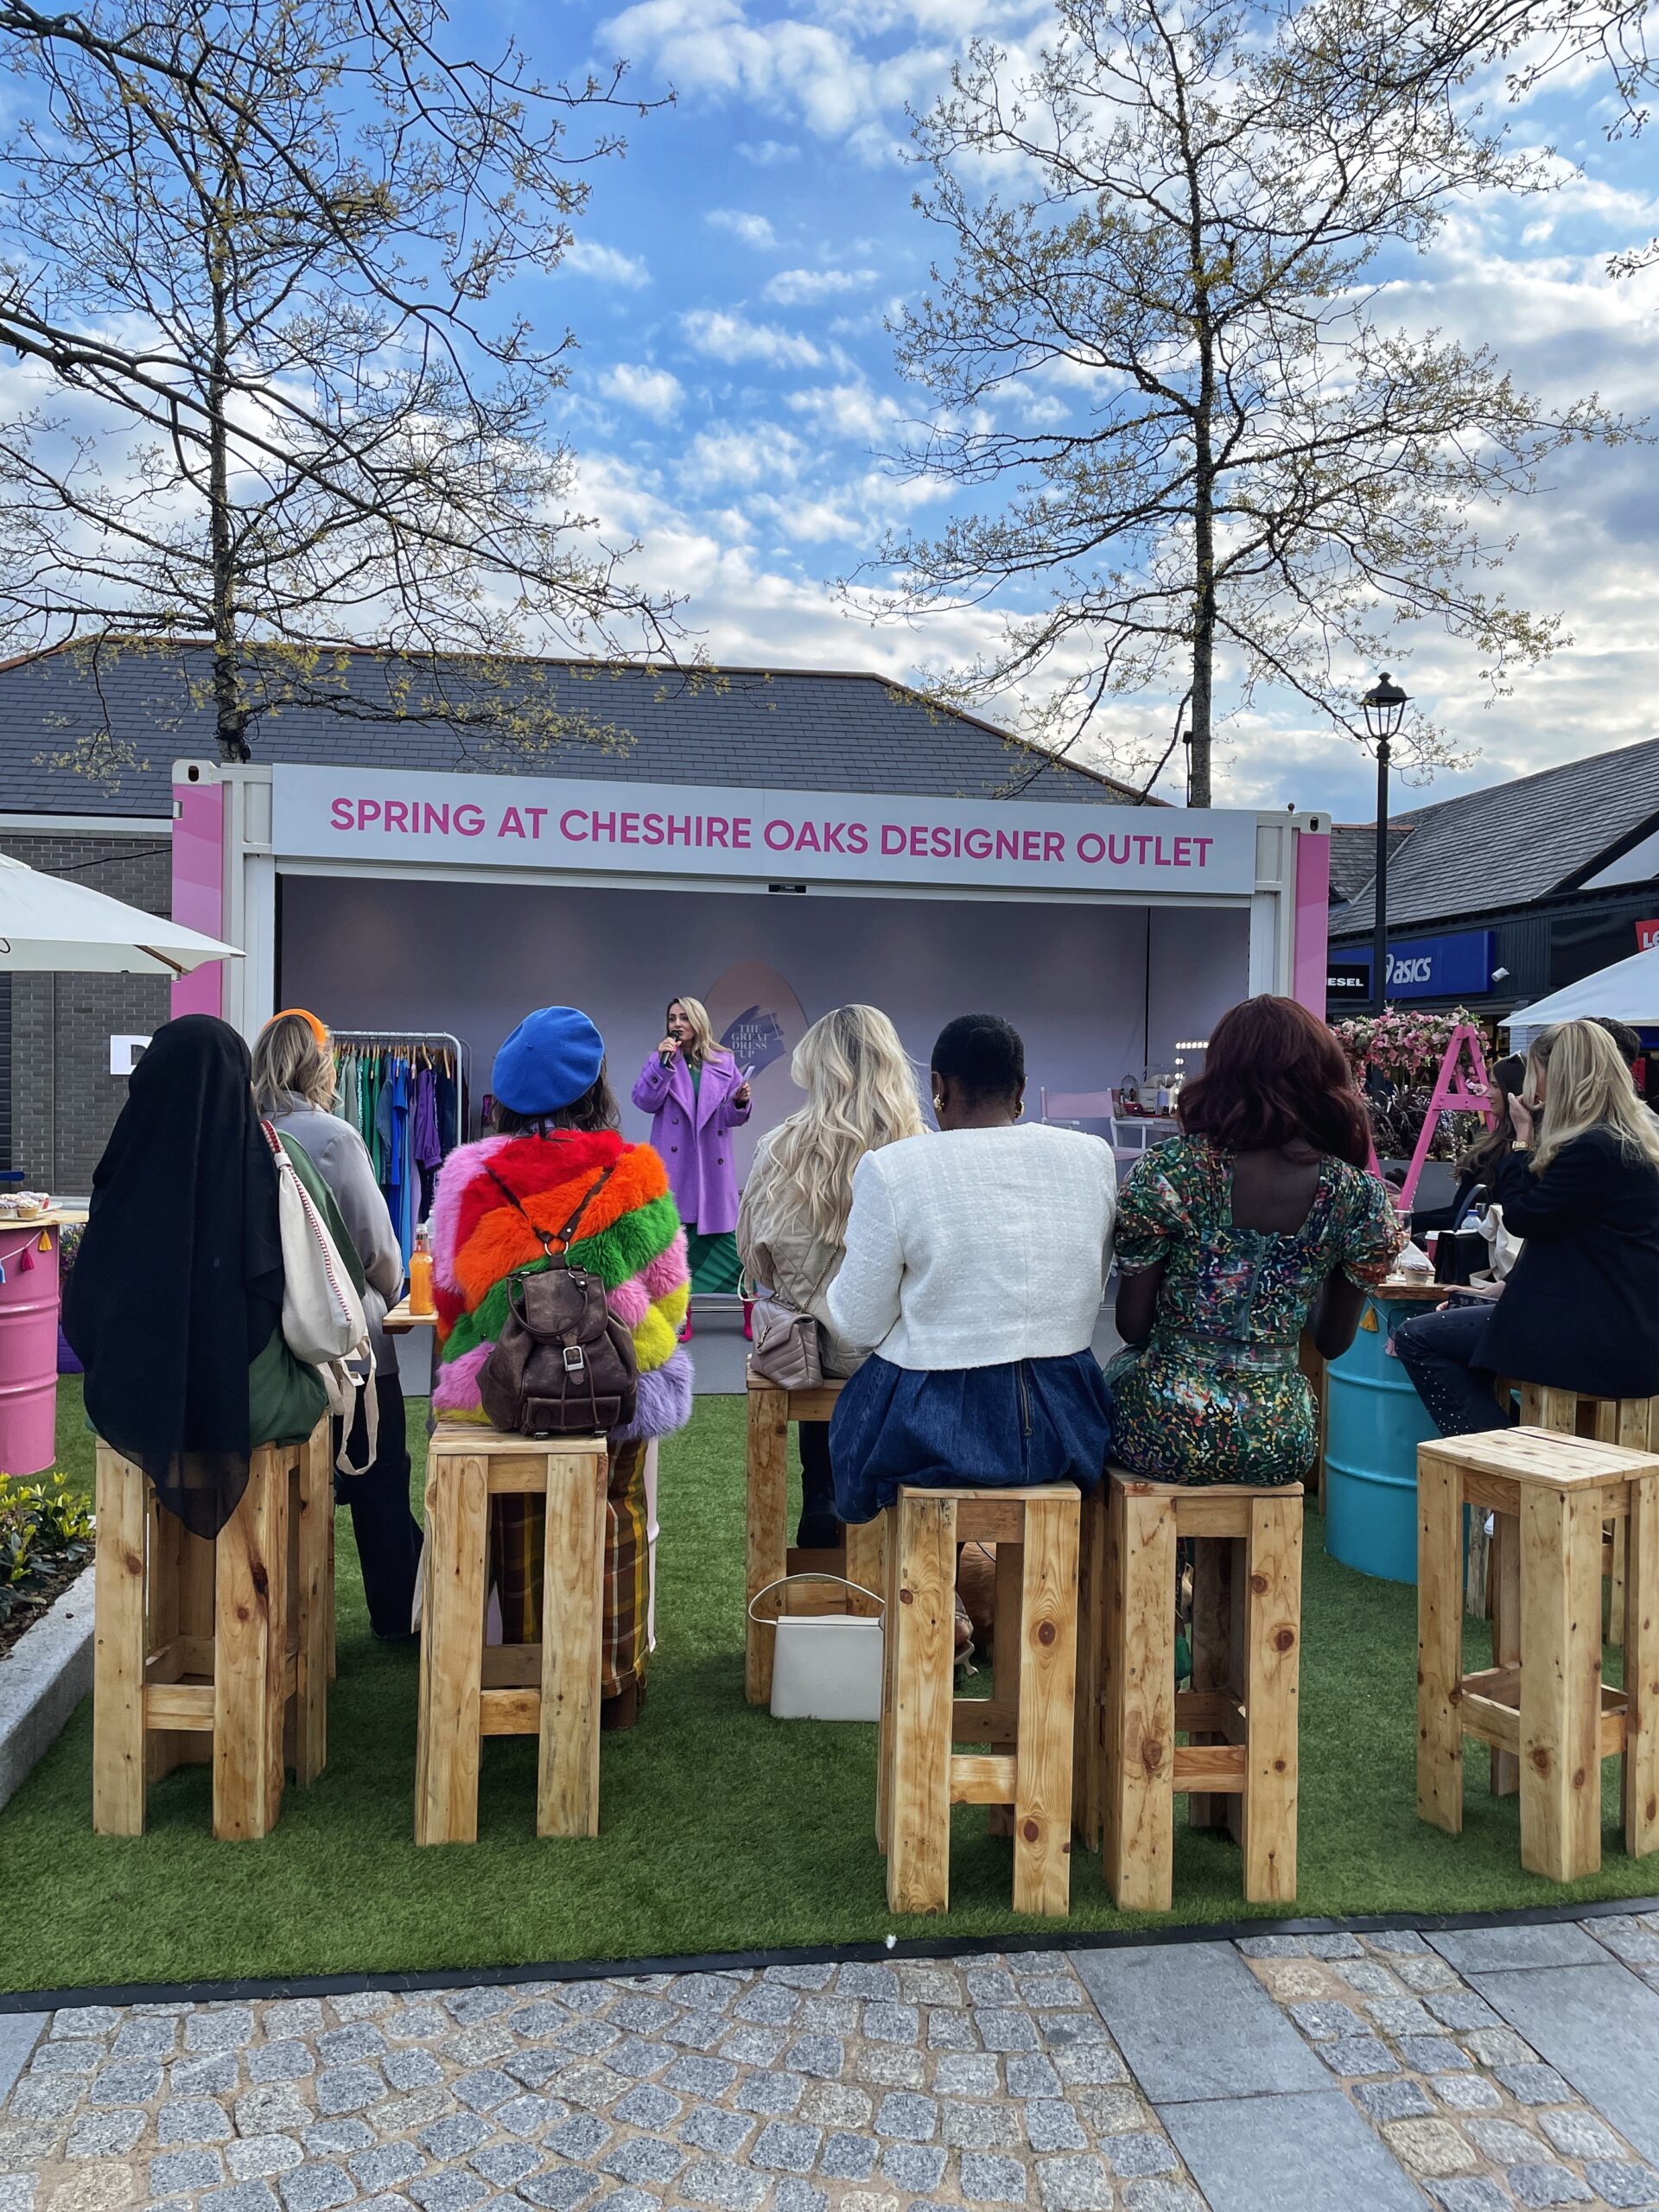 Cheshire Oaks is hosting The Great Dress Up series of events this summer